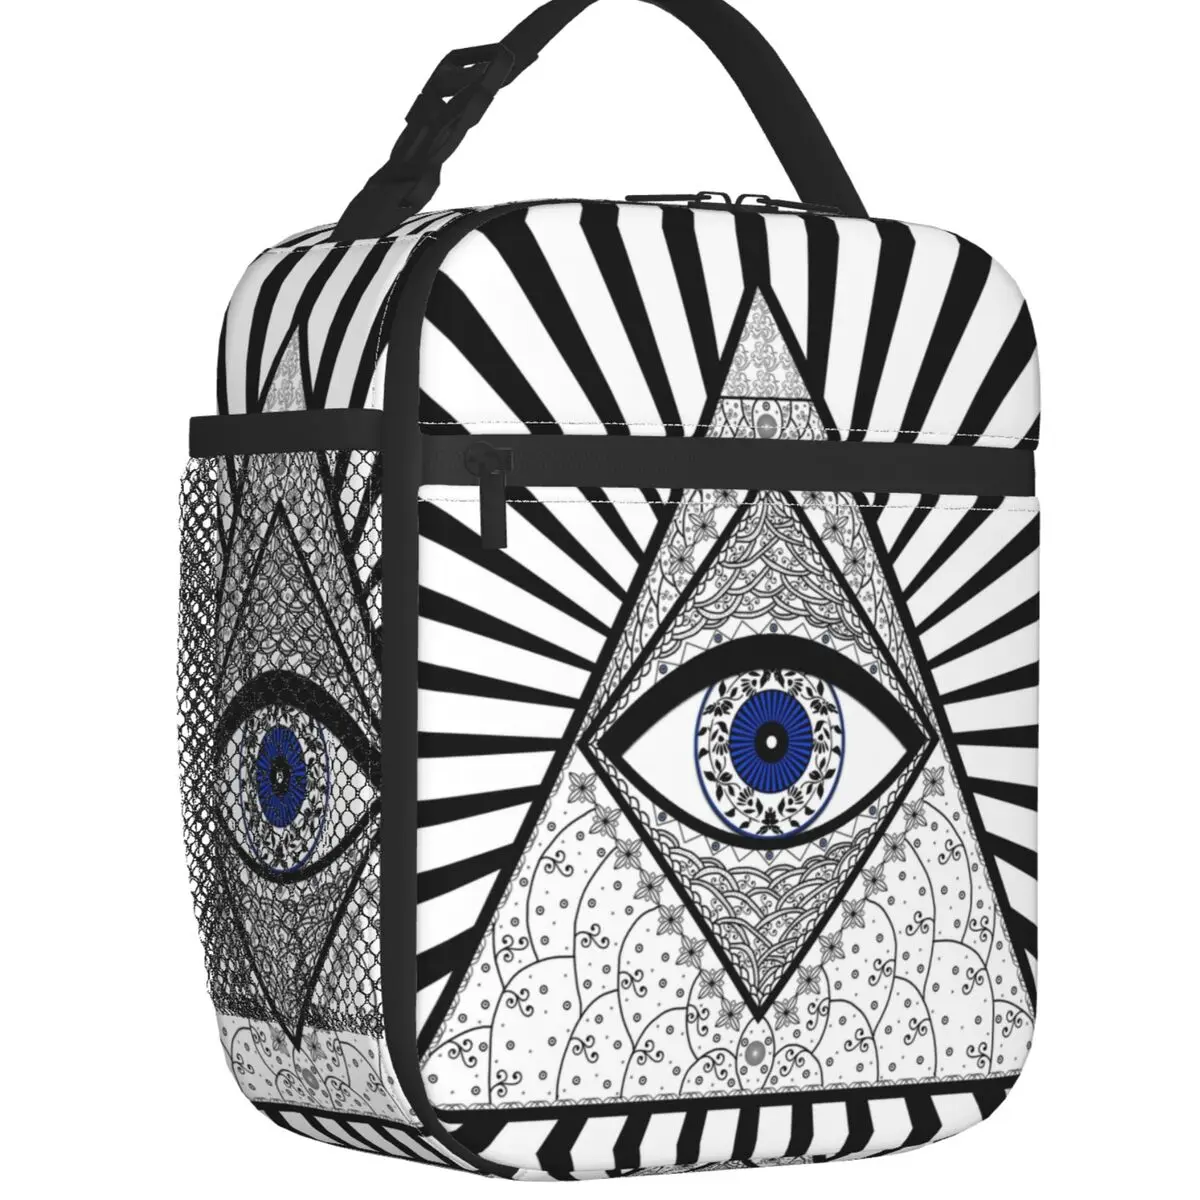 Evil Eye Good Luck Charm Energy Triangle Insulated Lunch Tote Bag Geometric Amulet Nazar Cooler Thermal Food Lunch Box Camping